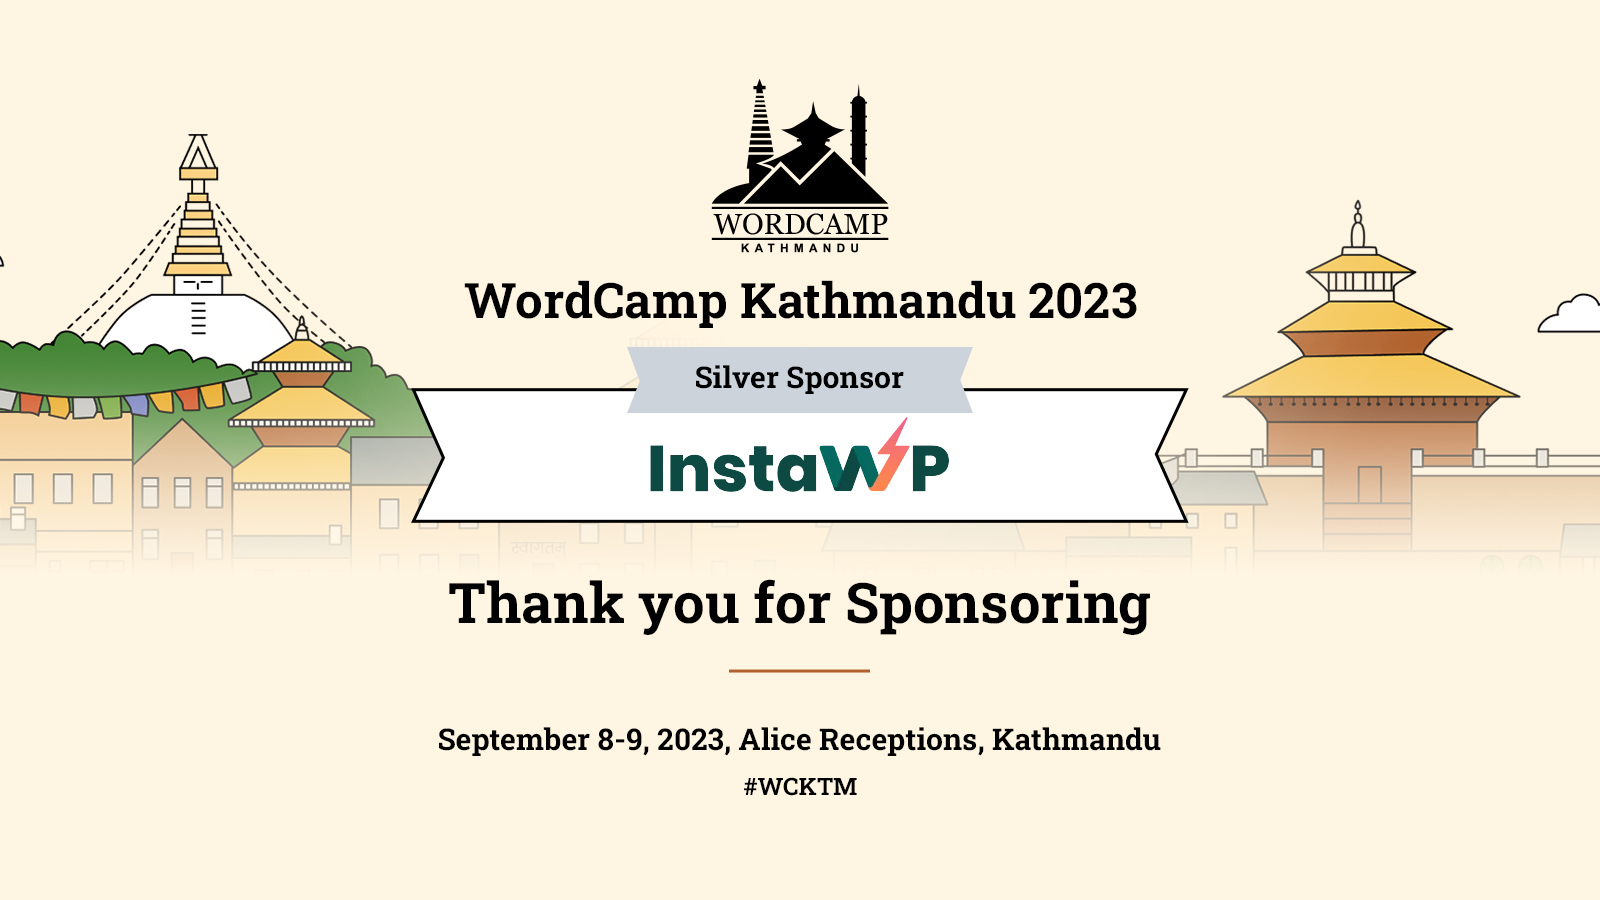 Thank you InstaWP for sponsoring